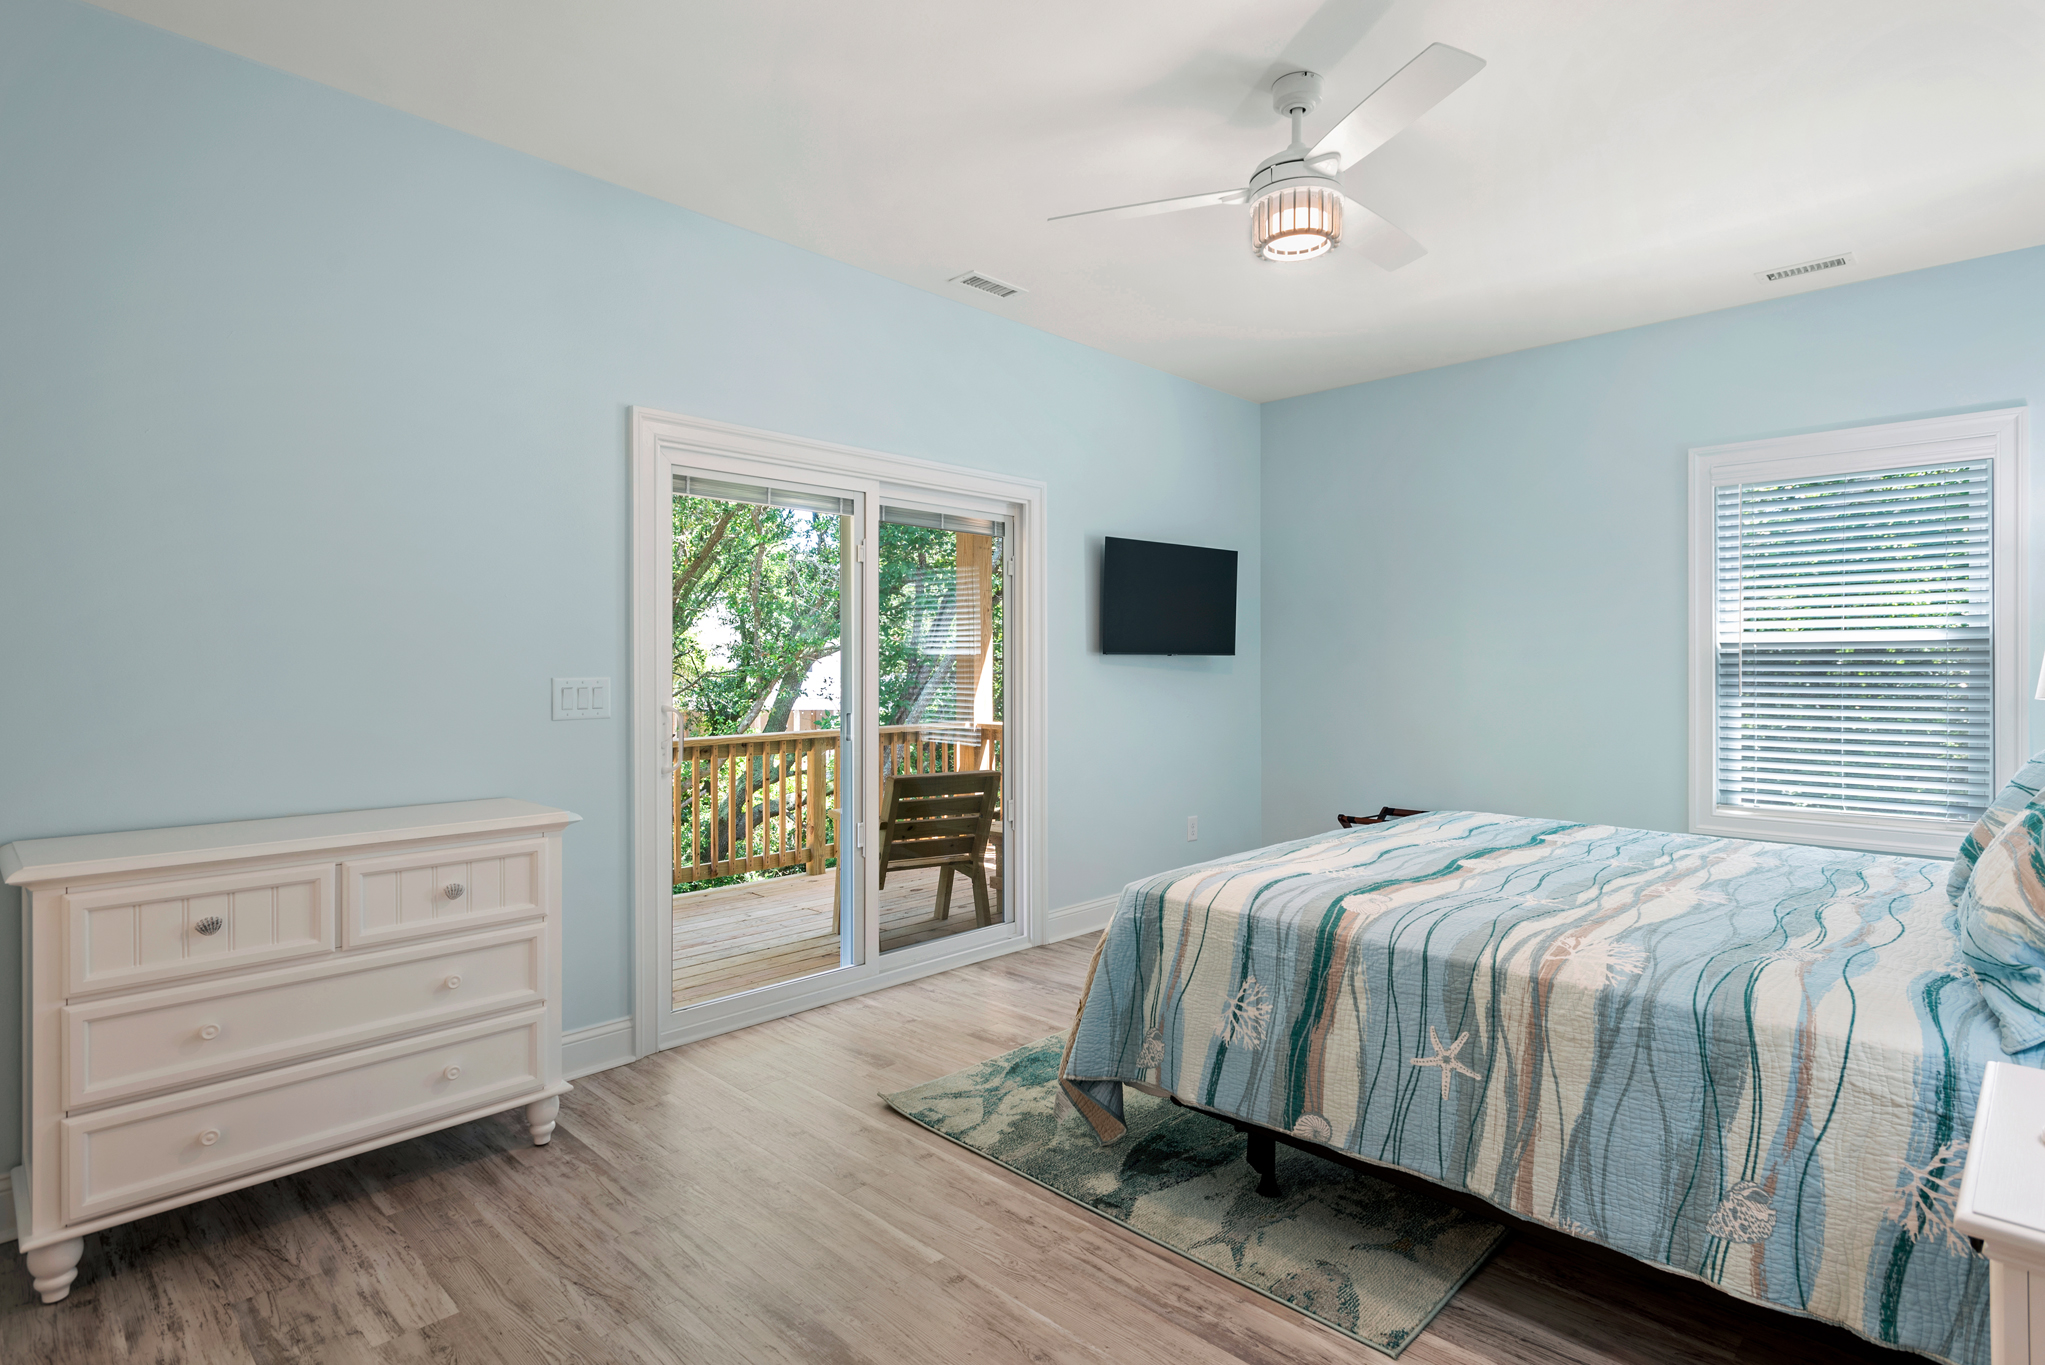 JR9706: Tranquility Cove | Top Level Bedroom 1